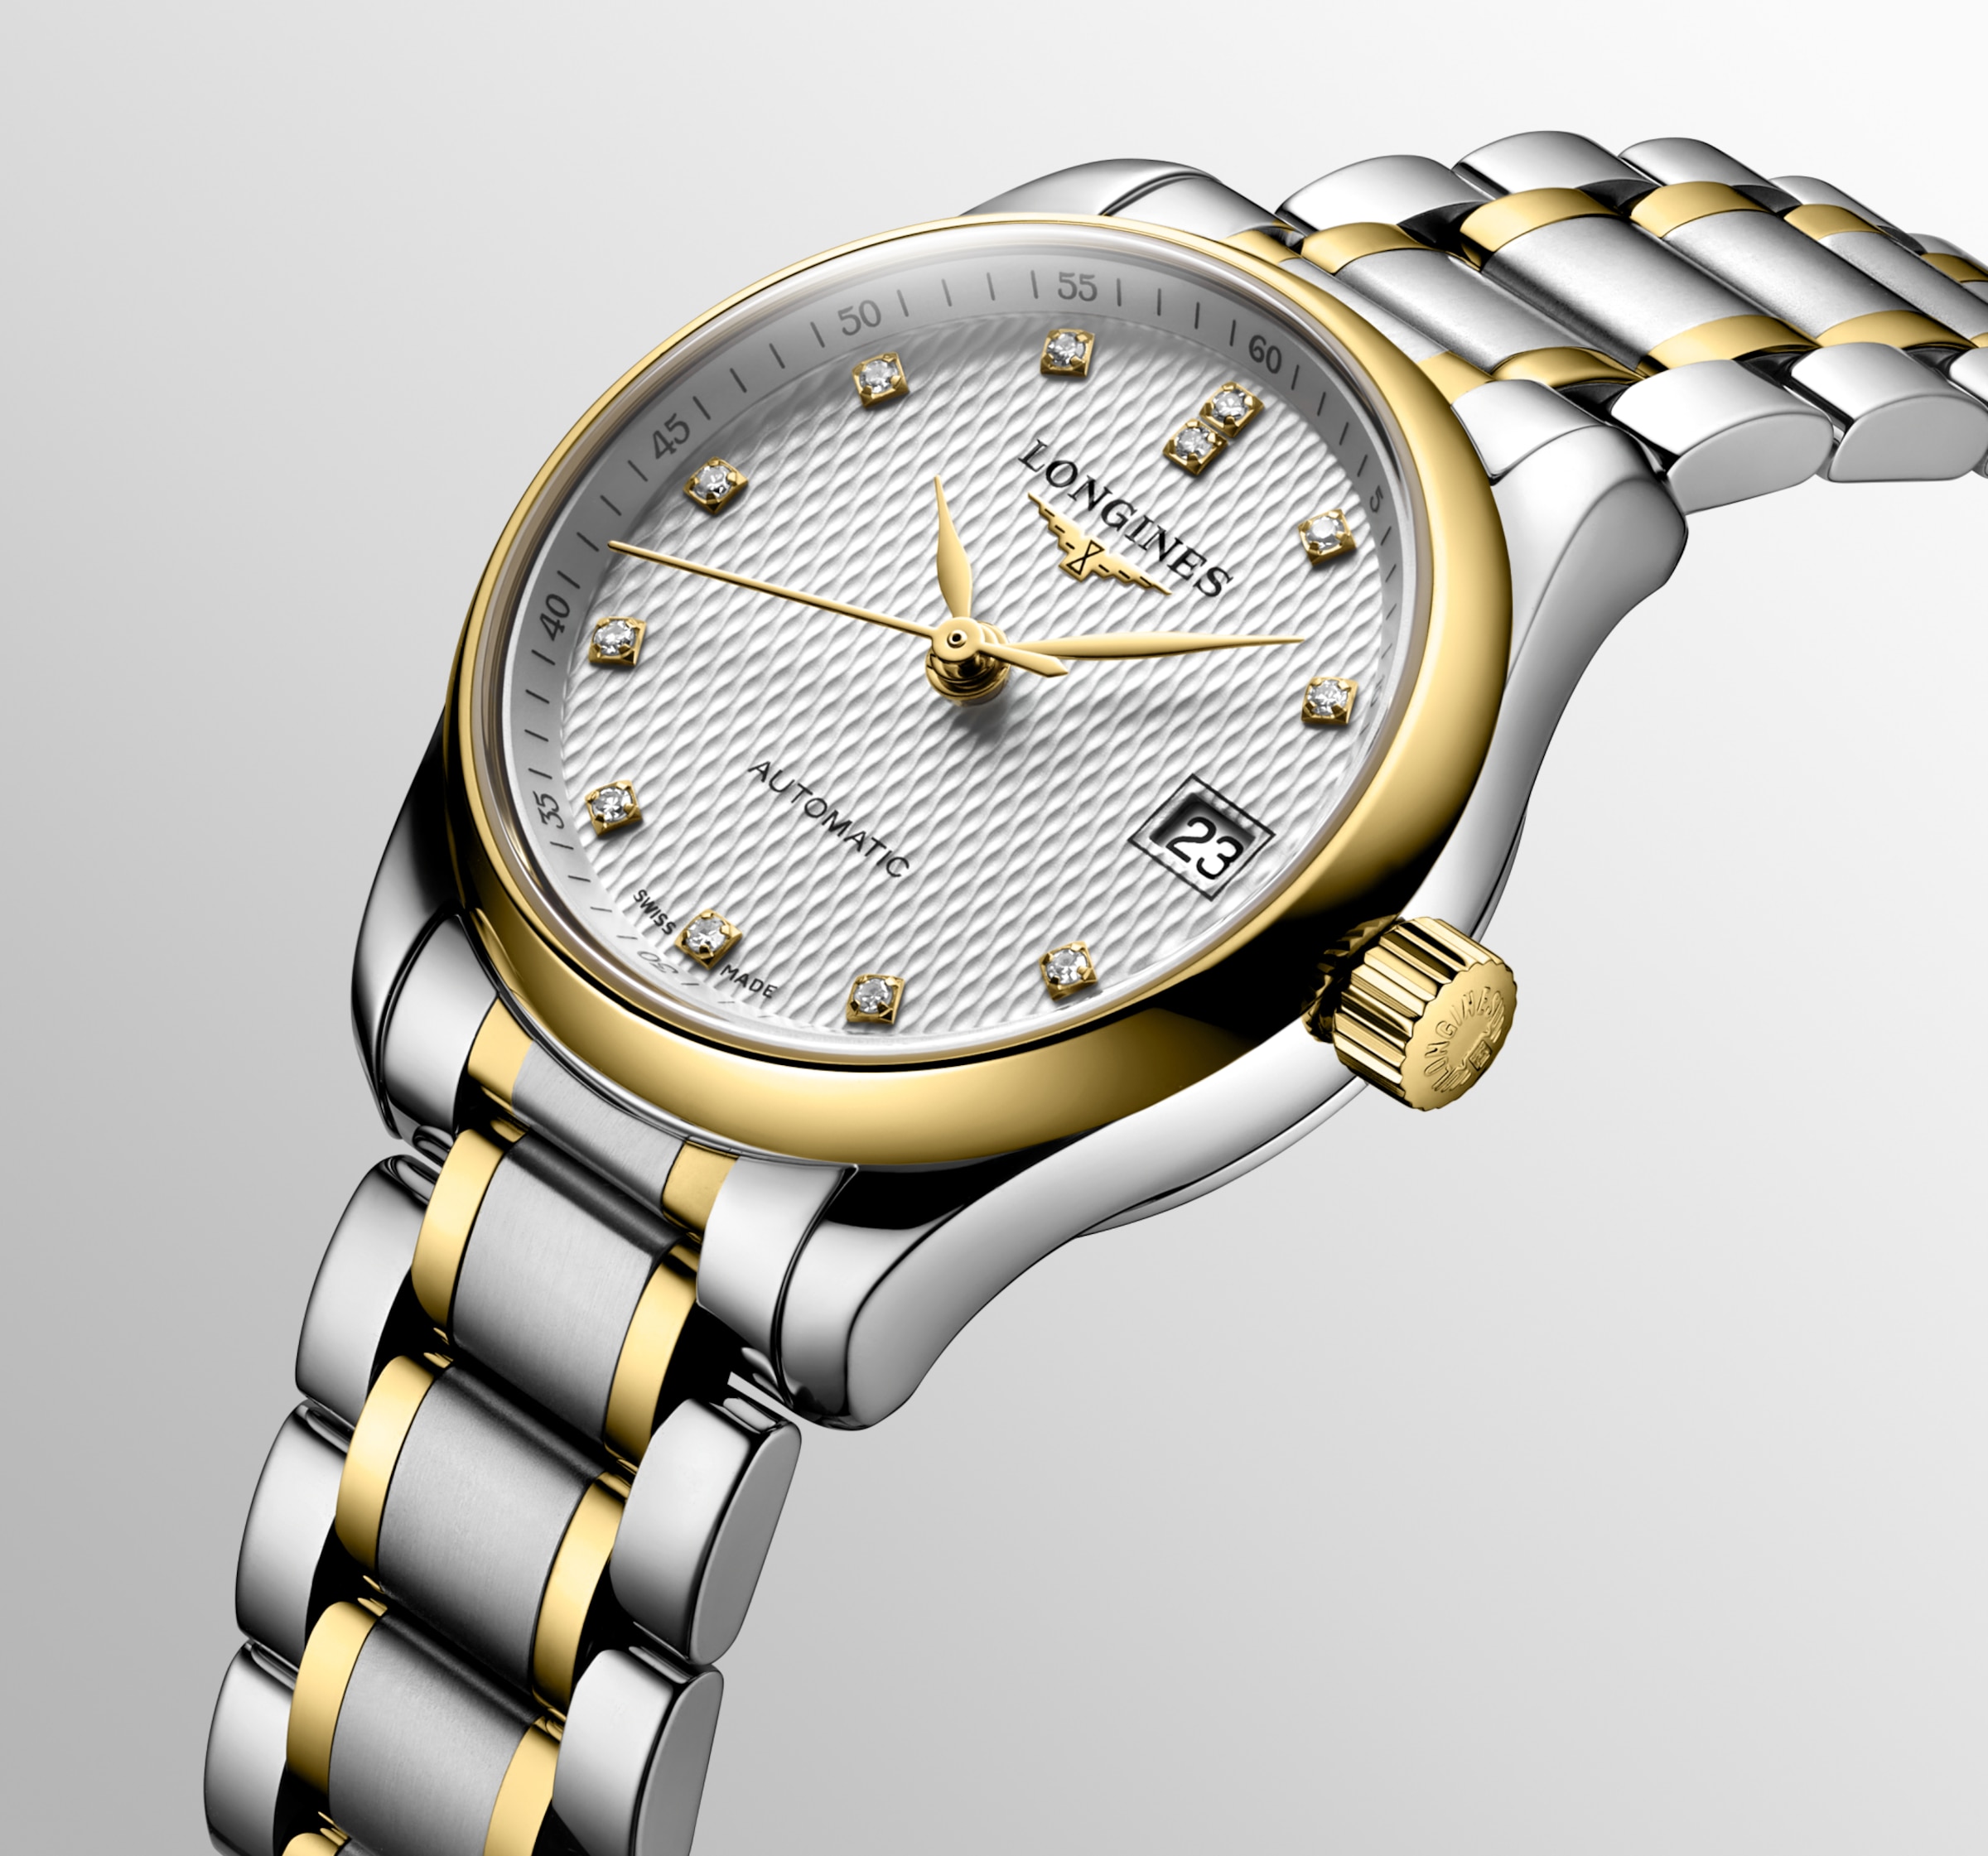 Longines MASTER COLLECTION Automatic Stainless steel and 18 karat yellow gold Watch - L2.128.5.77.7